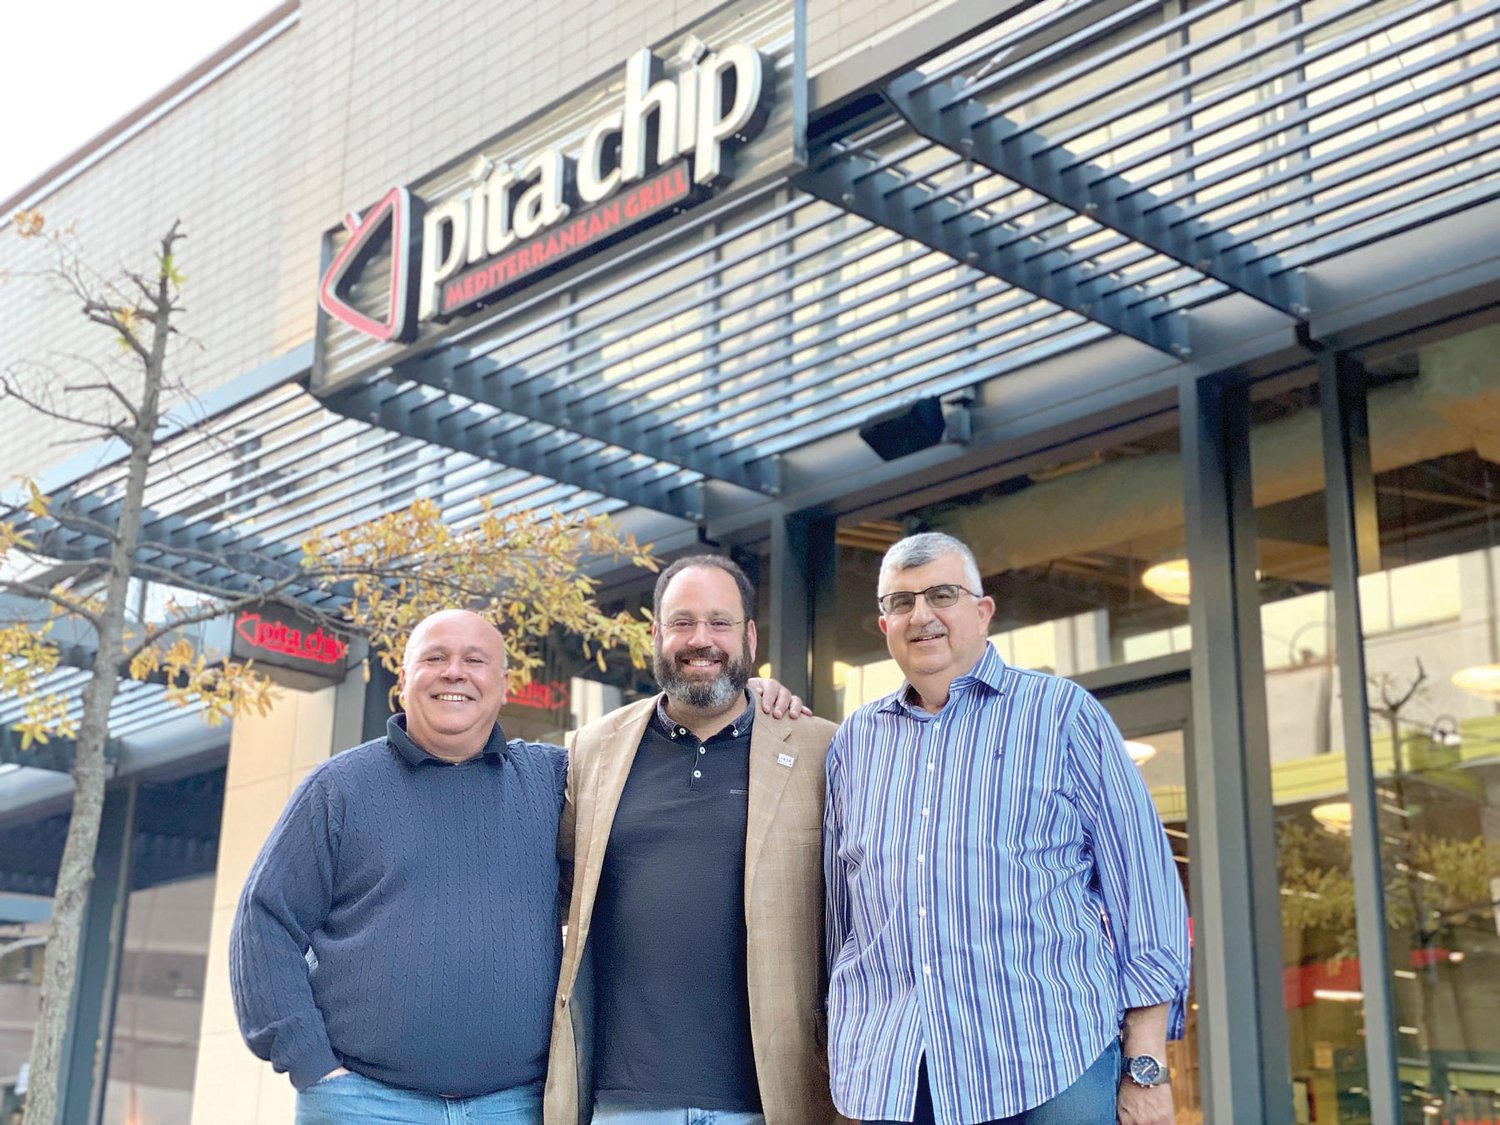 Omar Alsaadi, Mouhanad Kabbani, and Howard Klayman are the owners of Pita Chip, which is expanding from Philadelphia into the suburbs.